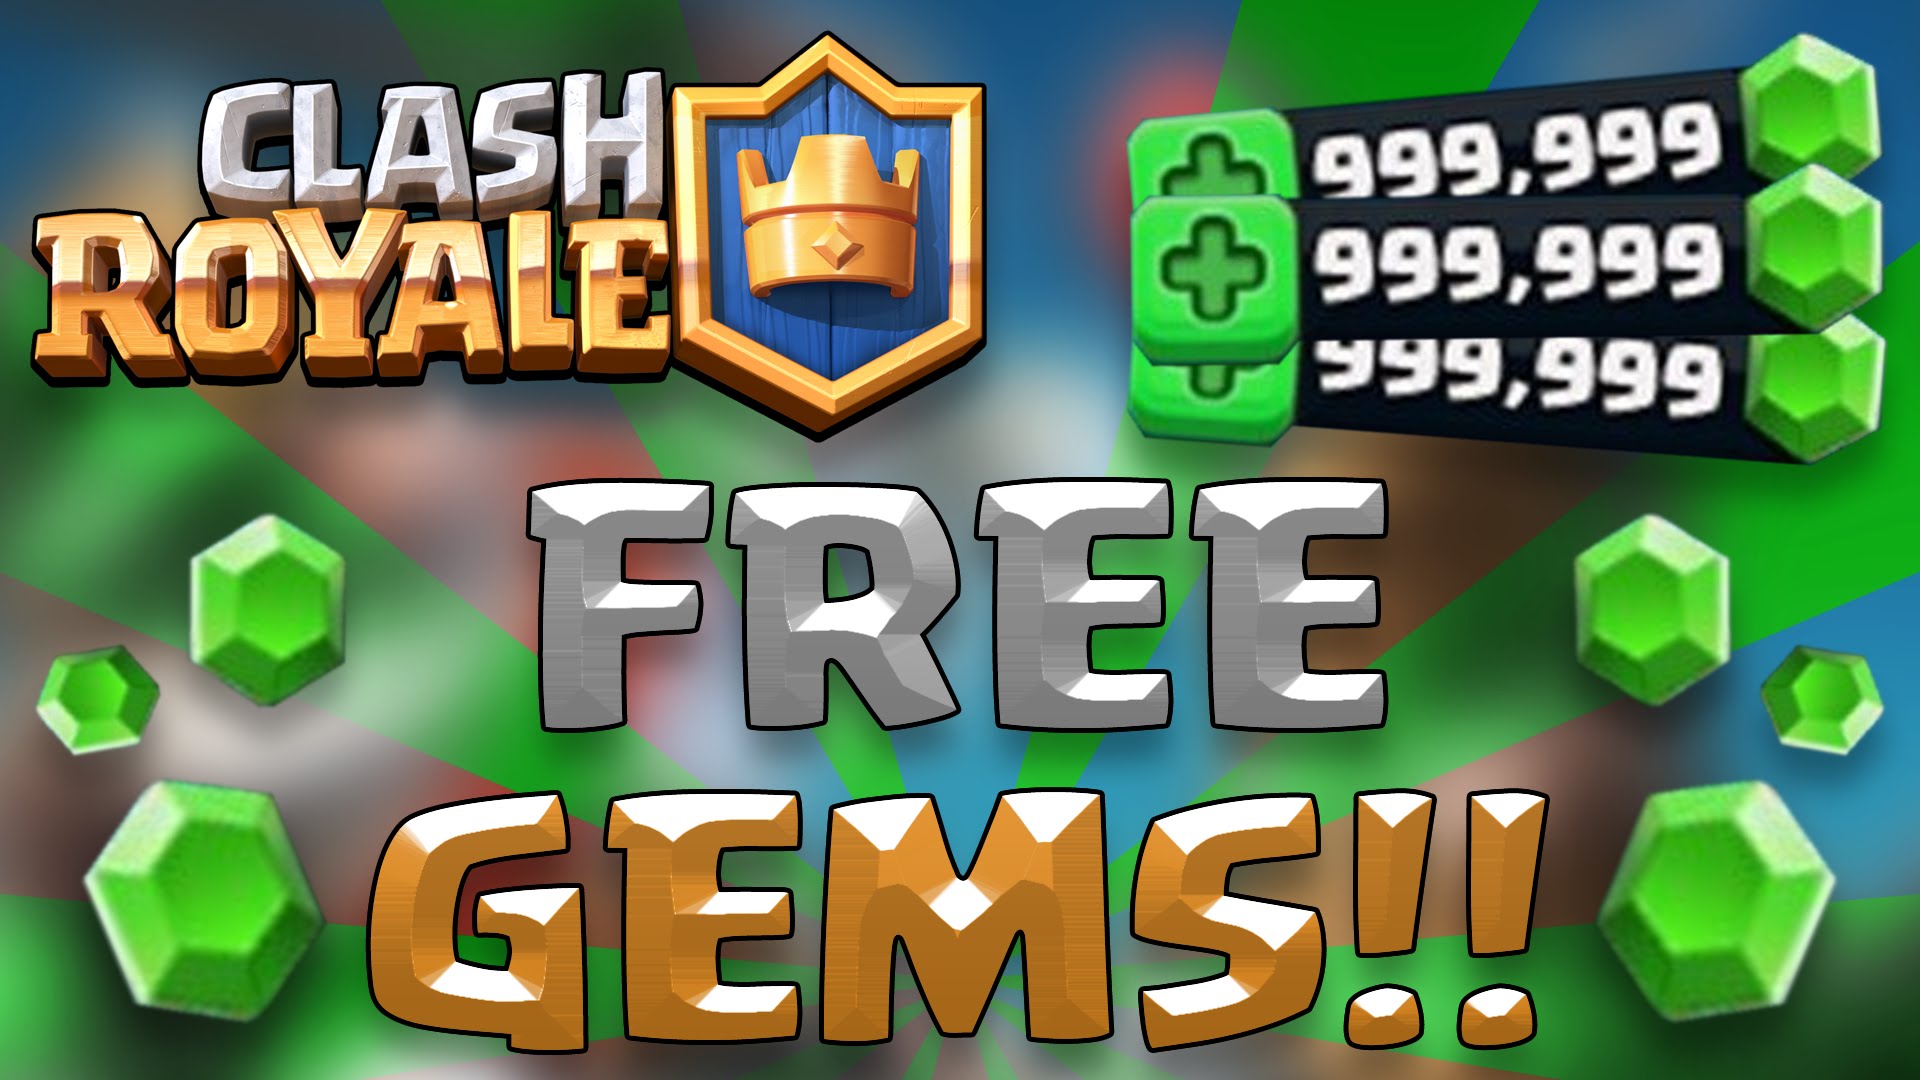 A New Clash Royale Hack Online to Generate Free Gems, Gold and Cards